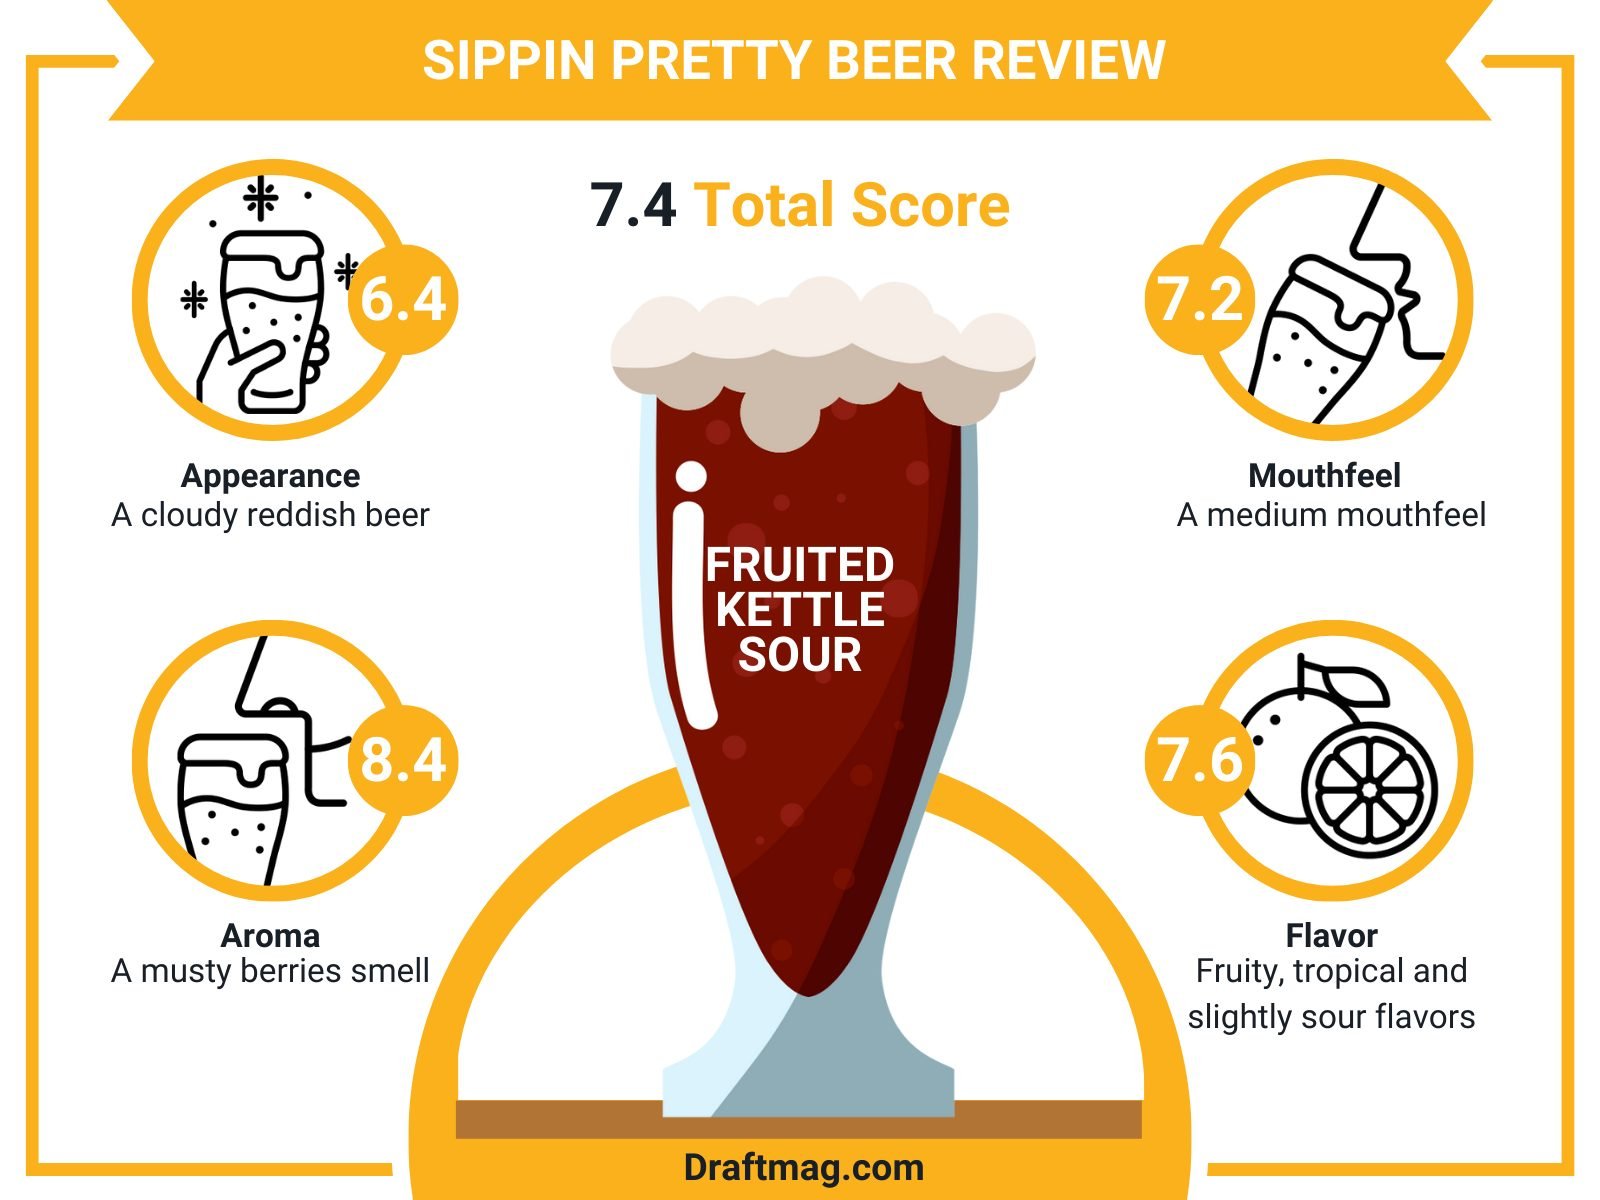 Sippin Pretty Beer Review Infographic